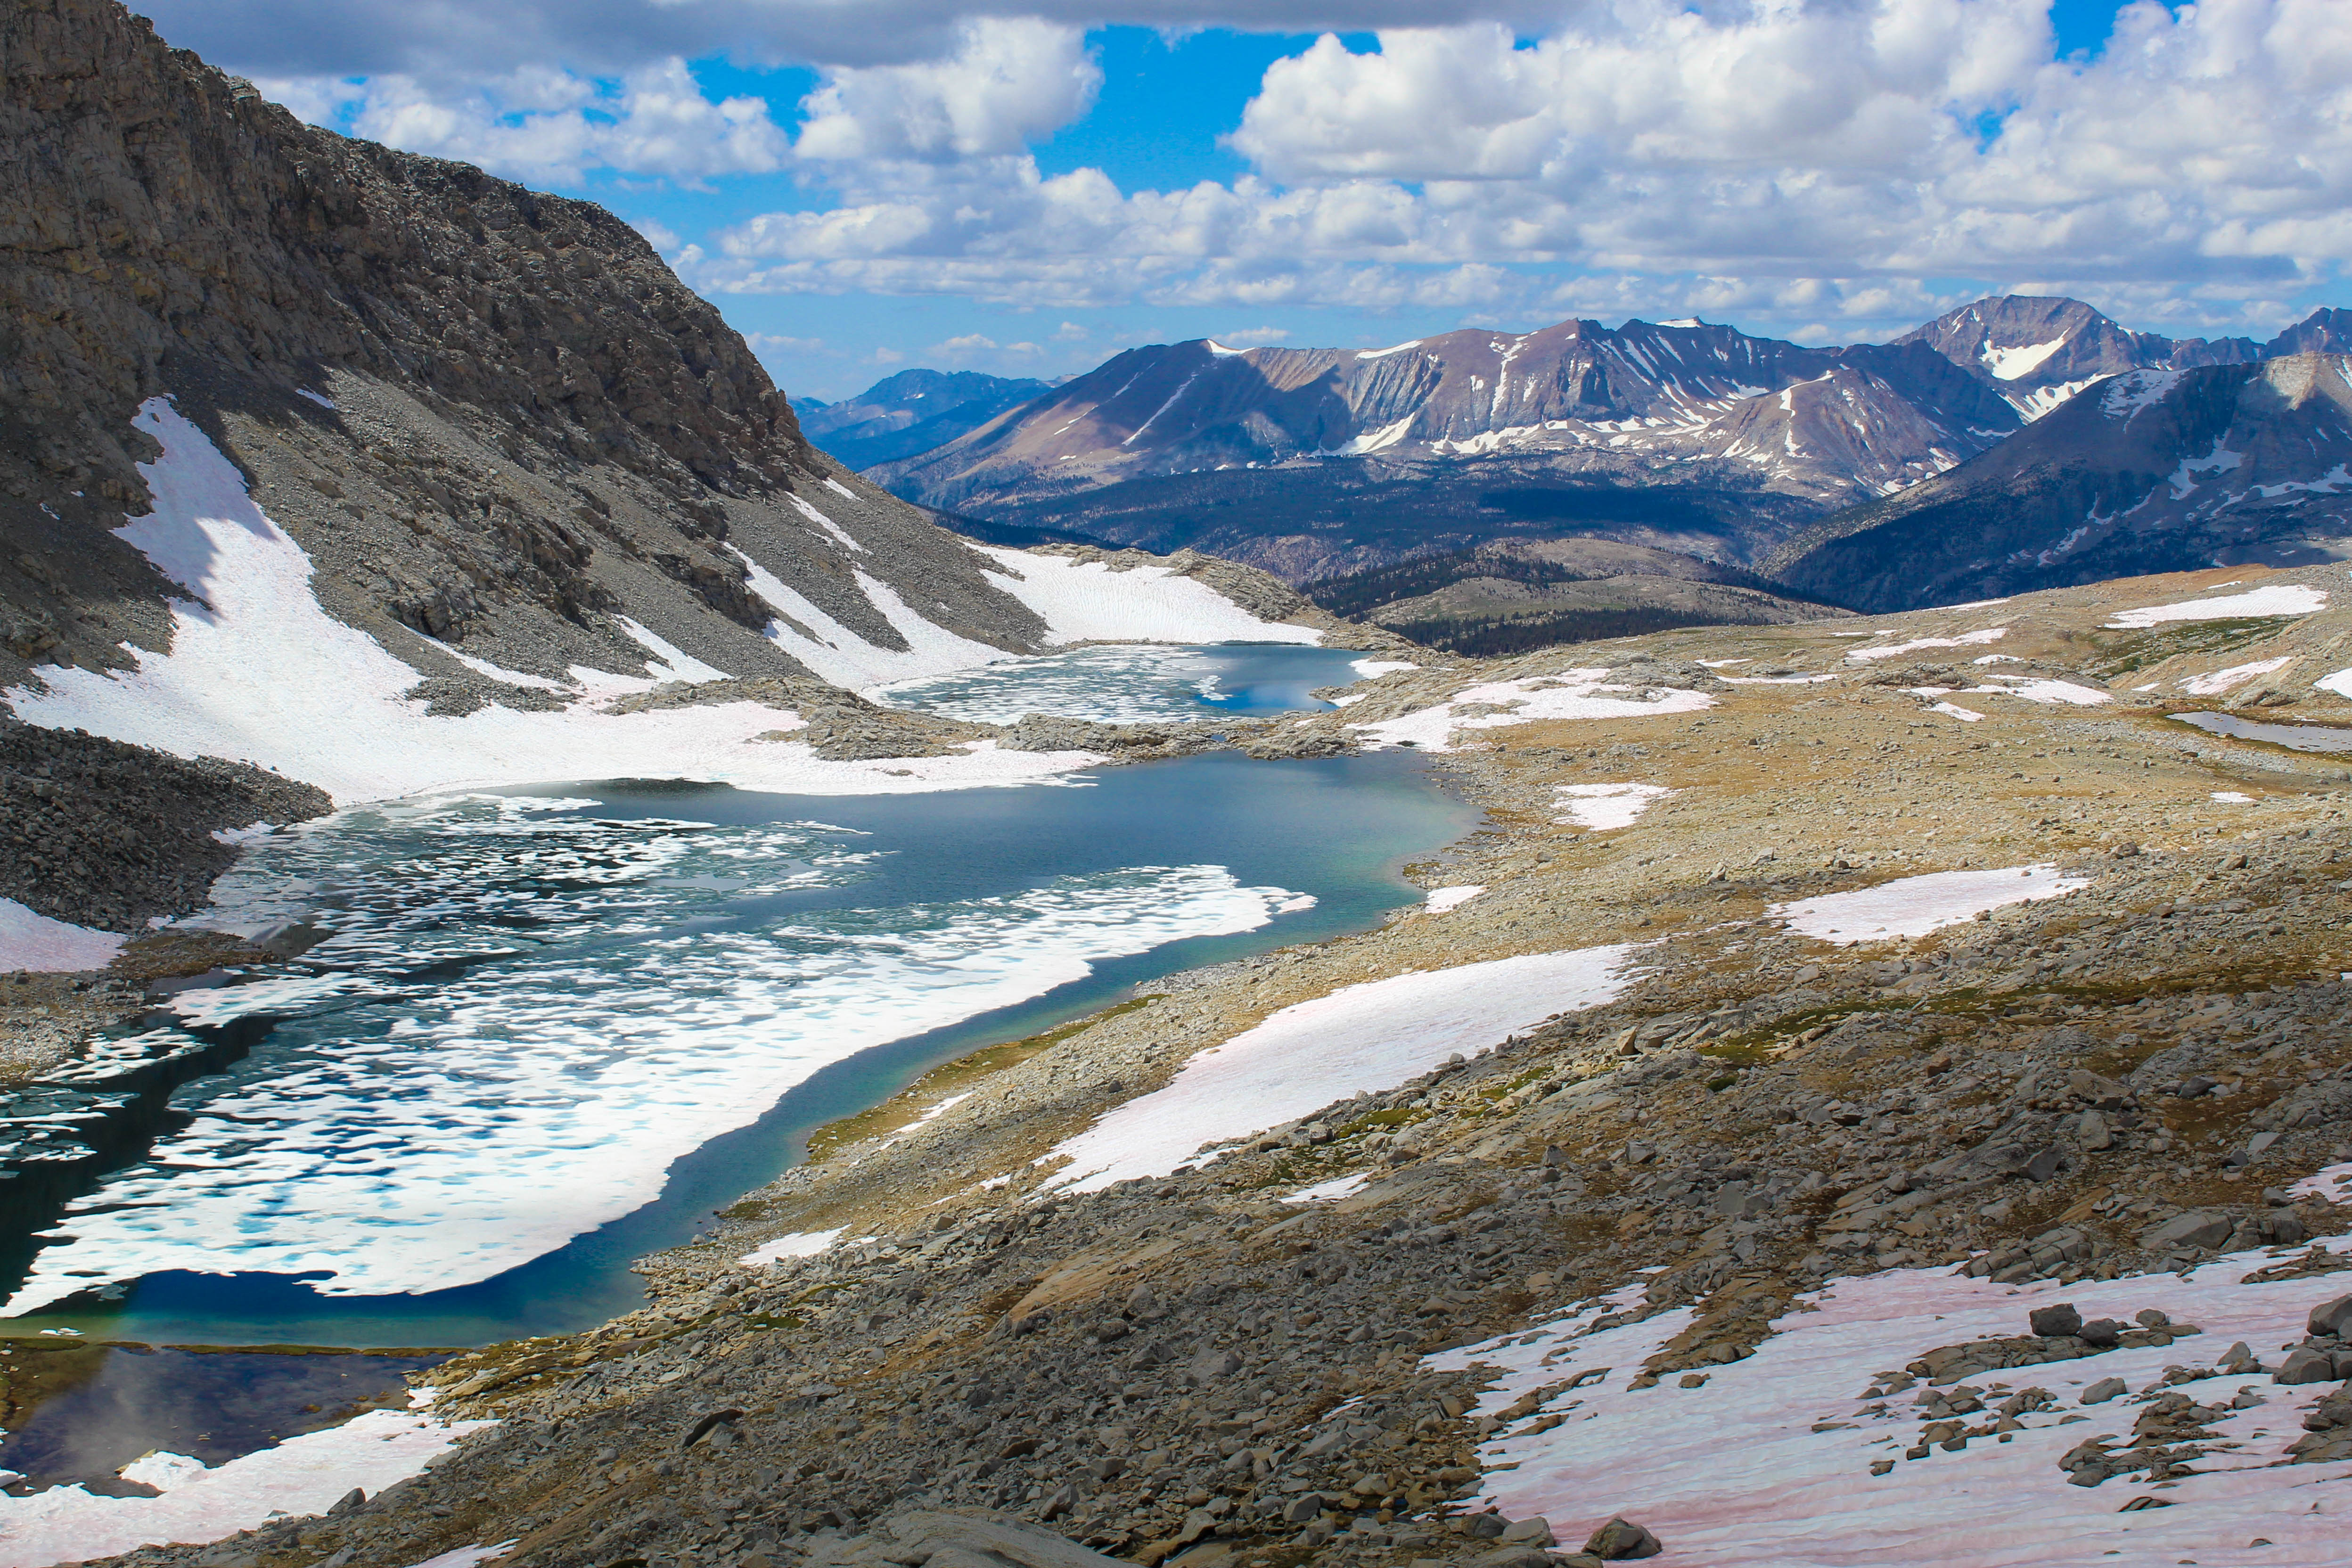 Two alpine lakes are half-covered in glaciers in the foreground. Behind, partly cloudy skies leave patterns of deep green and glowing green trees on the mountains in the distance.